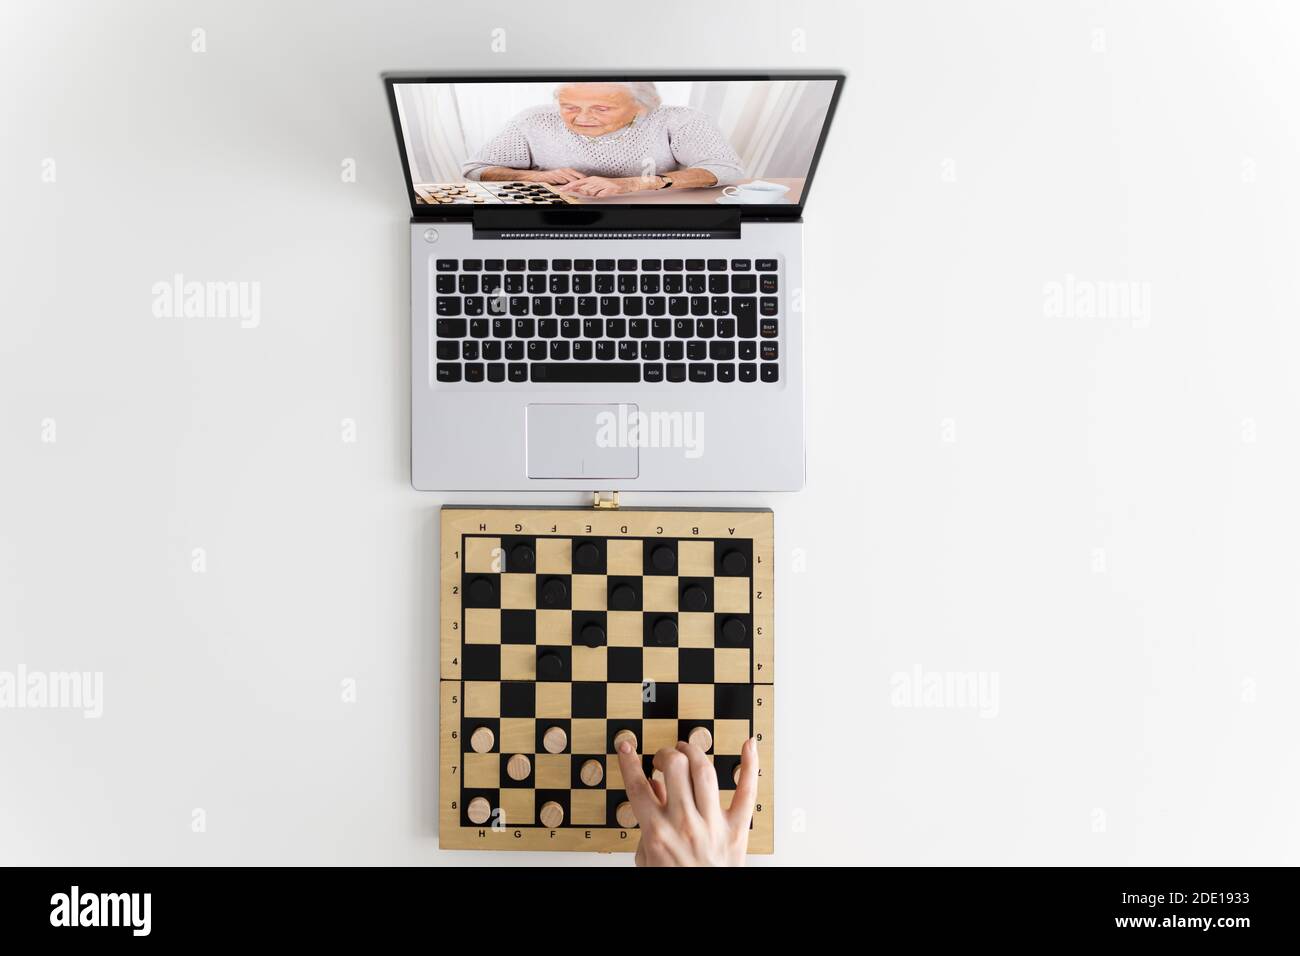 Woman Playing Checkers Online Using Video Conference Call Stock Photo